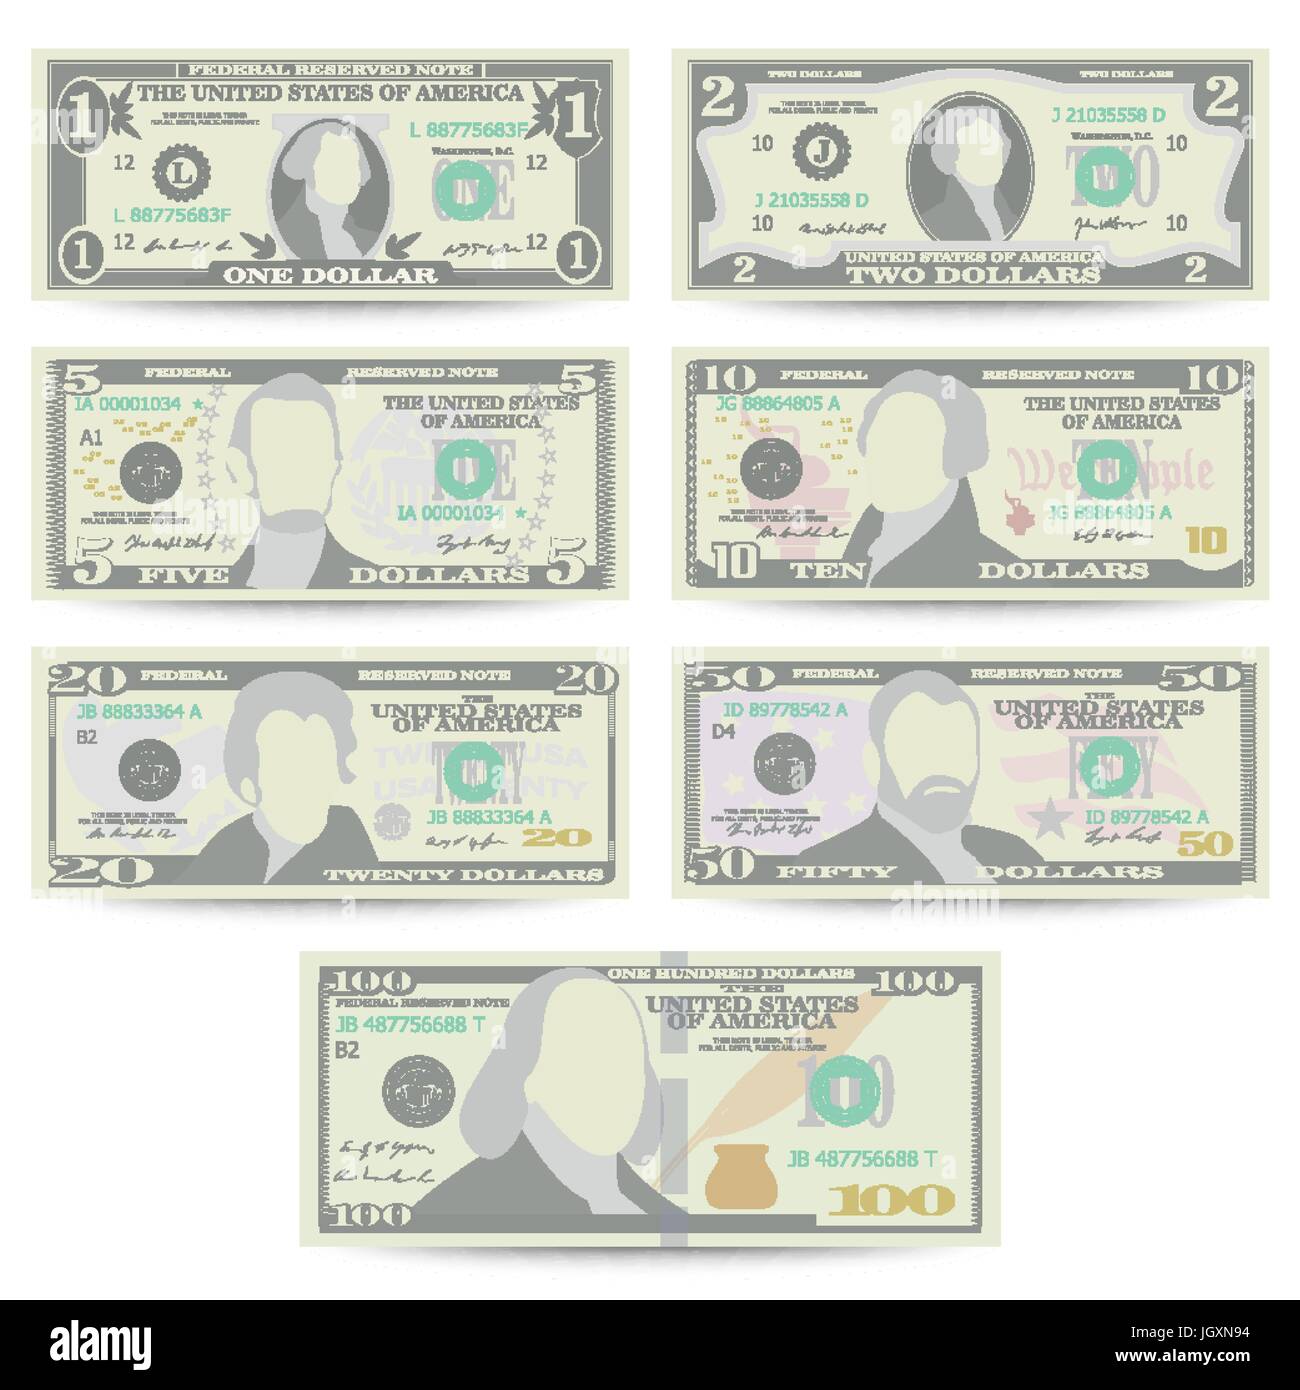 Dollars Banknote Set Vector. Cartoon US Currency. Front Side Of American Money Bill Isolated Illustration. Cash Dollar Symbol. Every Denomination Of US Currency Note. Stock Vector